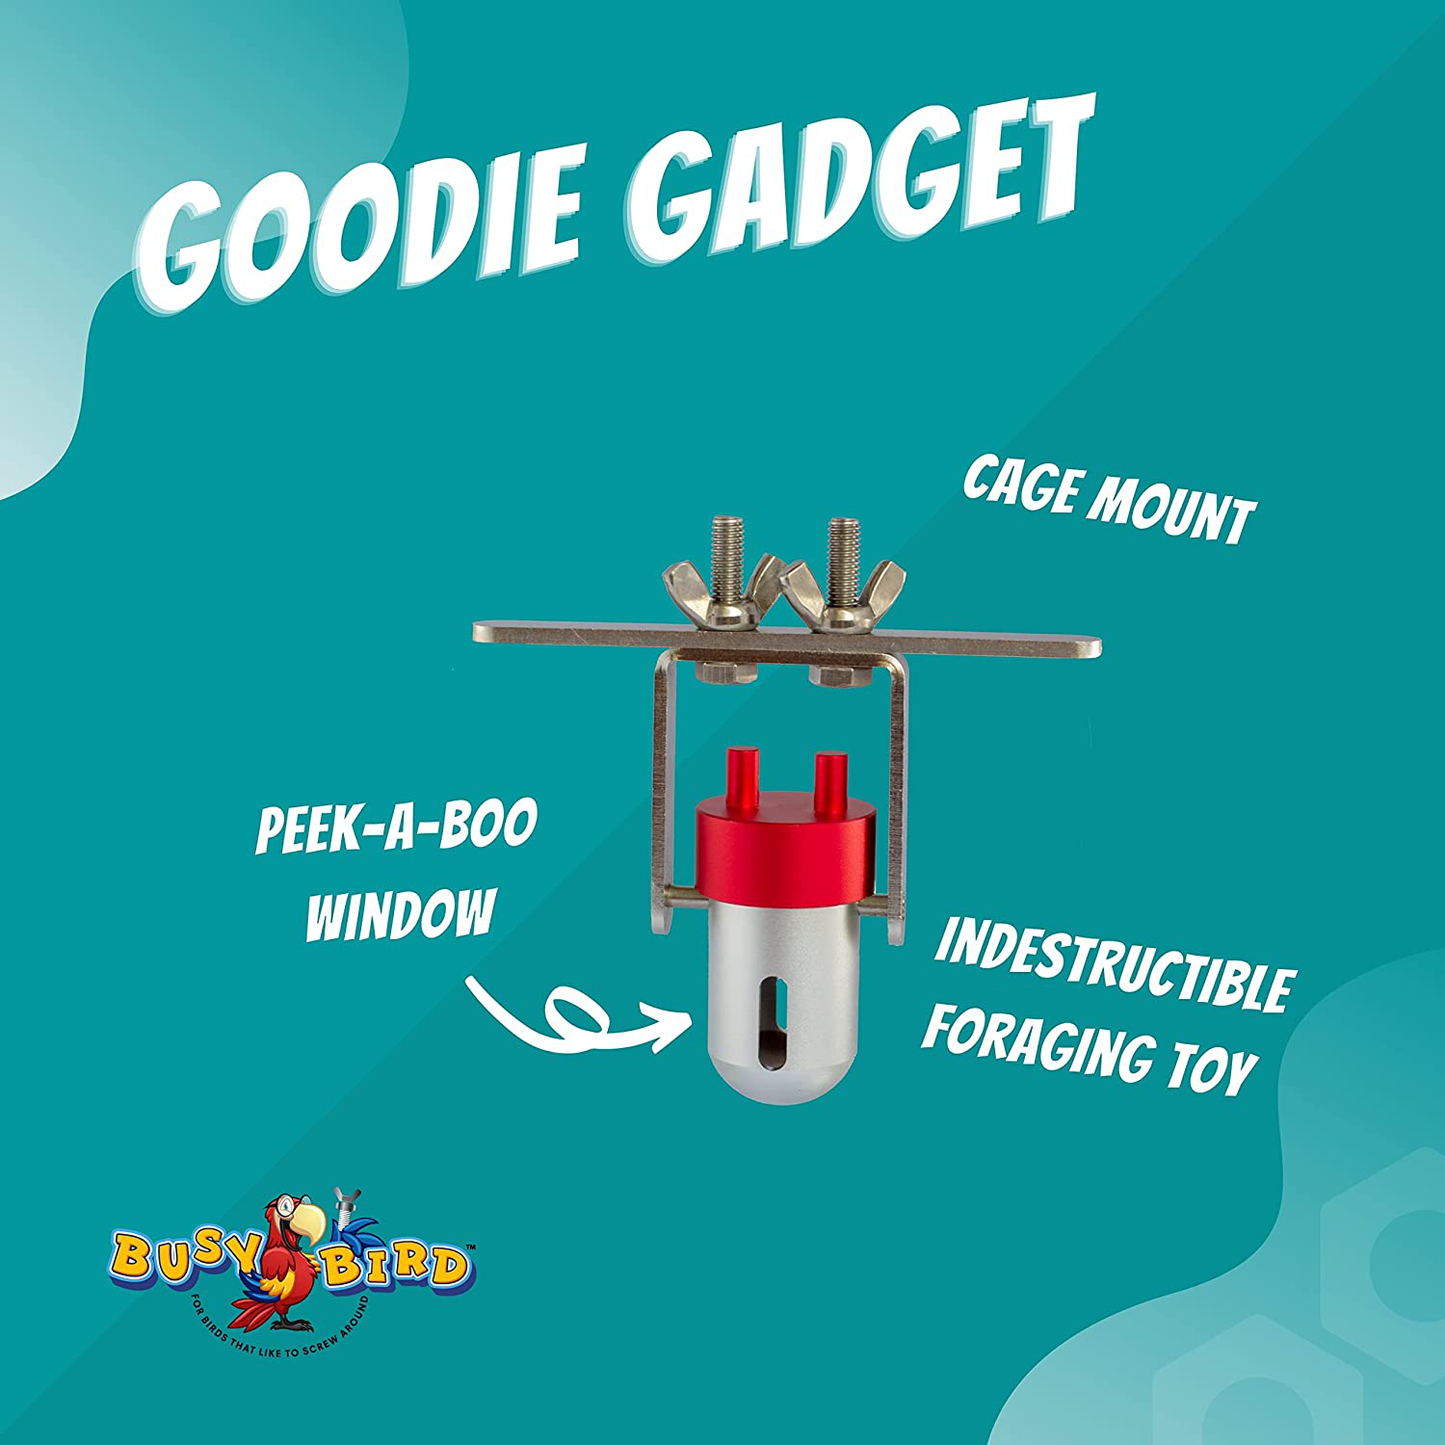 Busy Bird | Goodie Gadget Foraging Bird Toy - Spins on Axis with Peek-A-Boo Window - 100% Metal, Ultimate Brain Teaser and Mind Game for Medium to Extra Large Birds